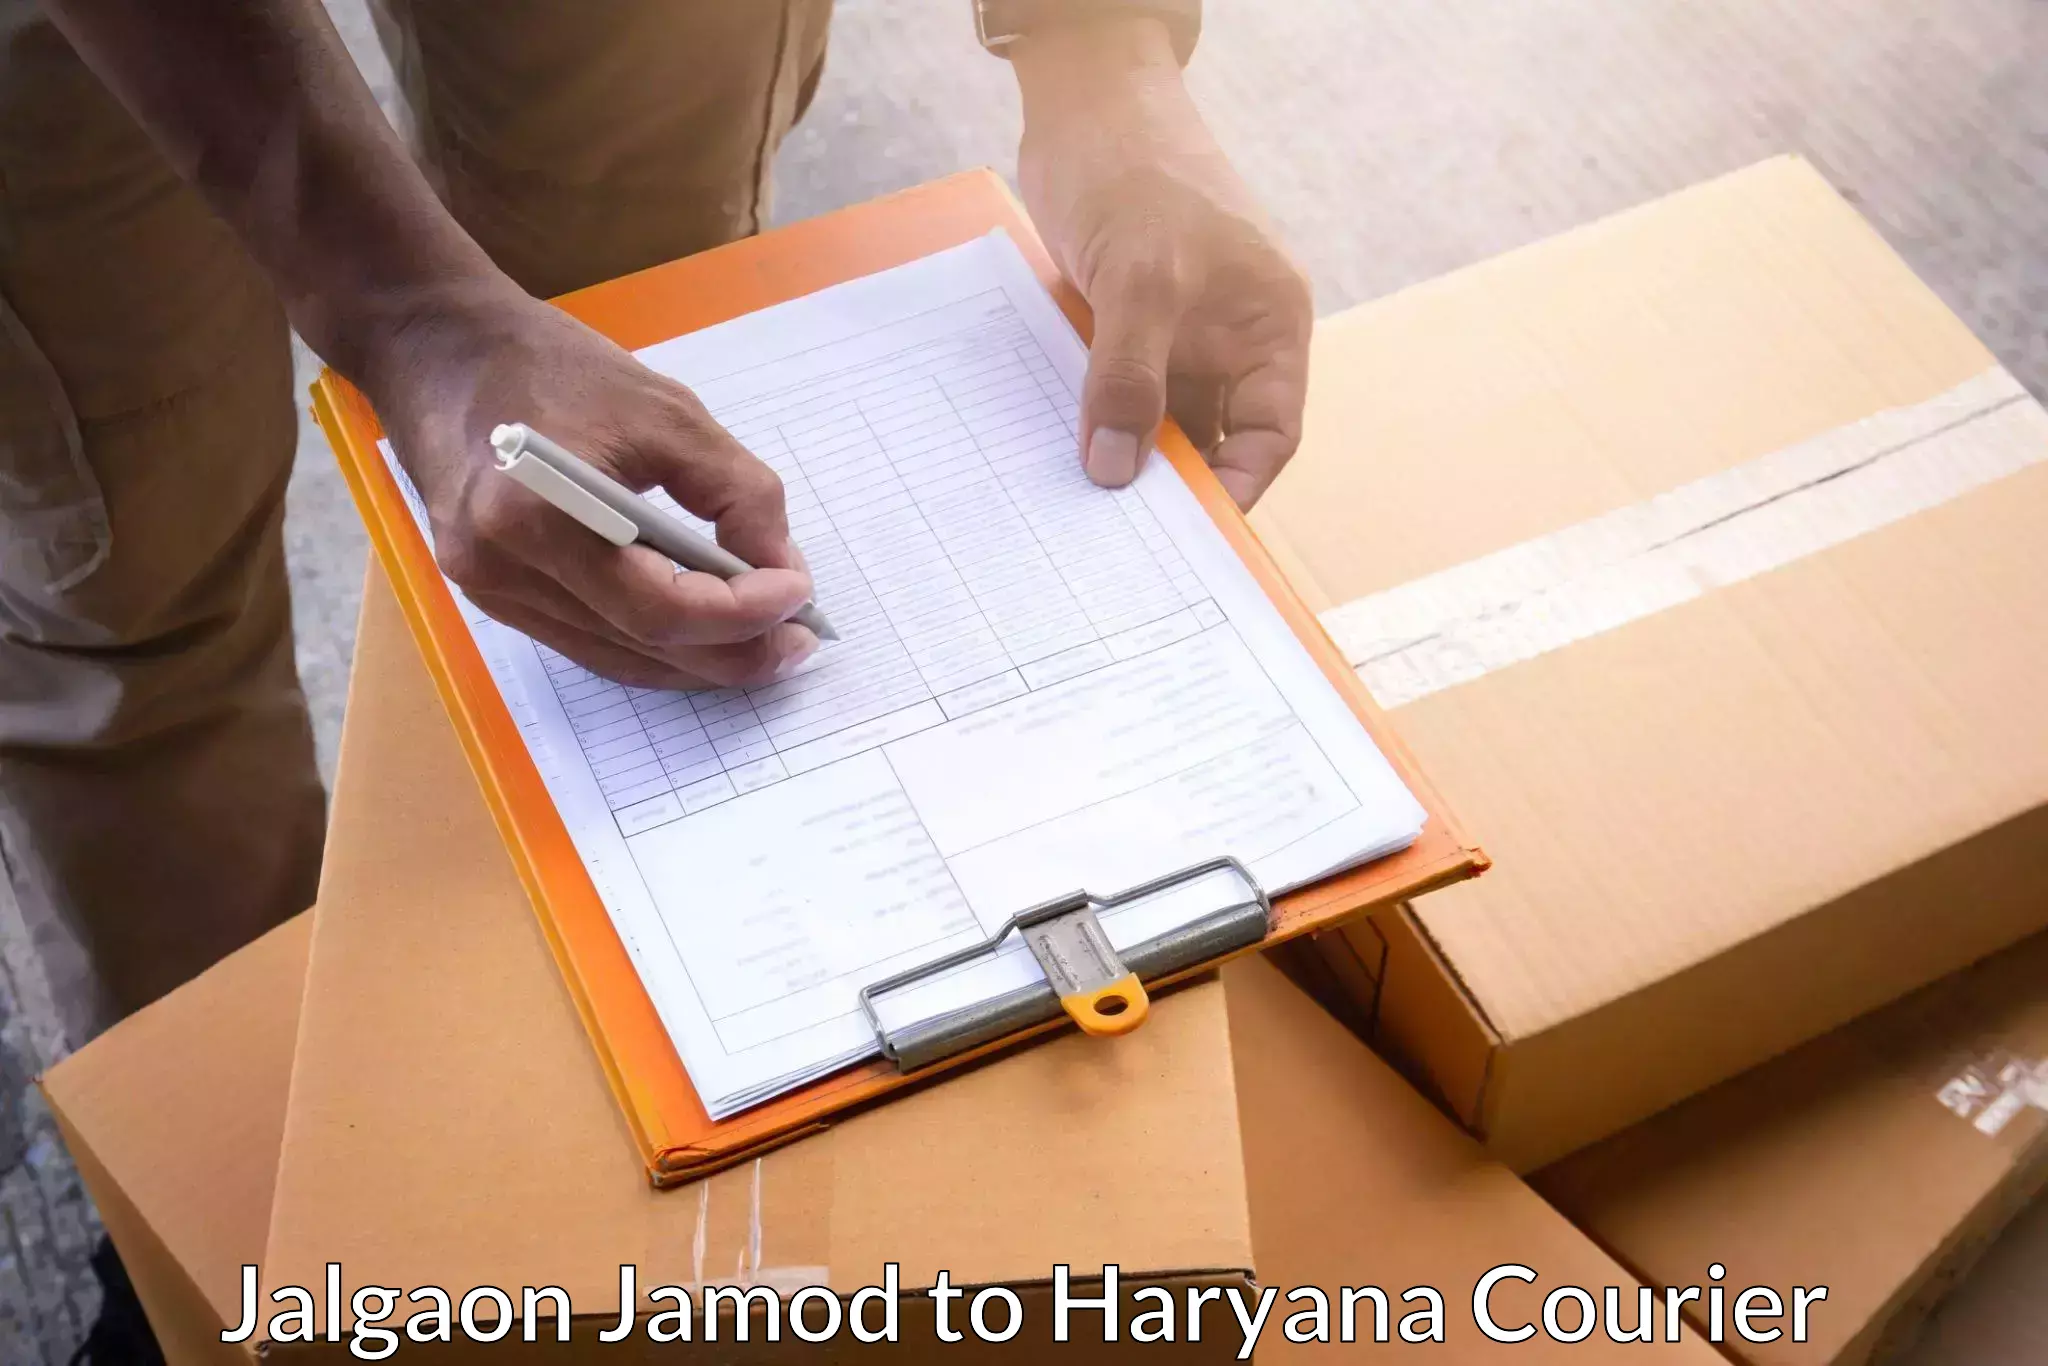 Courier insurance in Jalgaon Jamod to Agroha